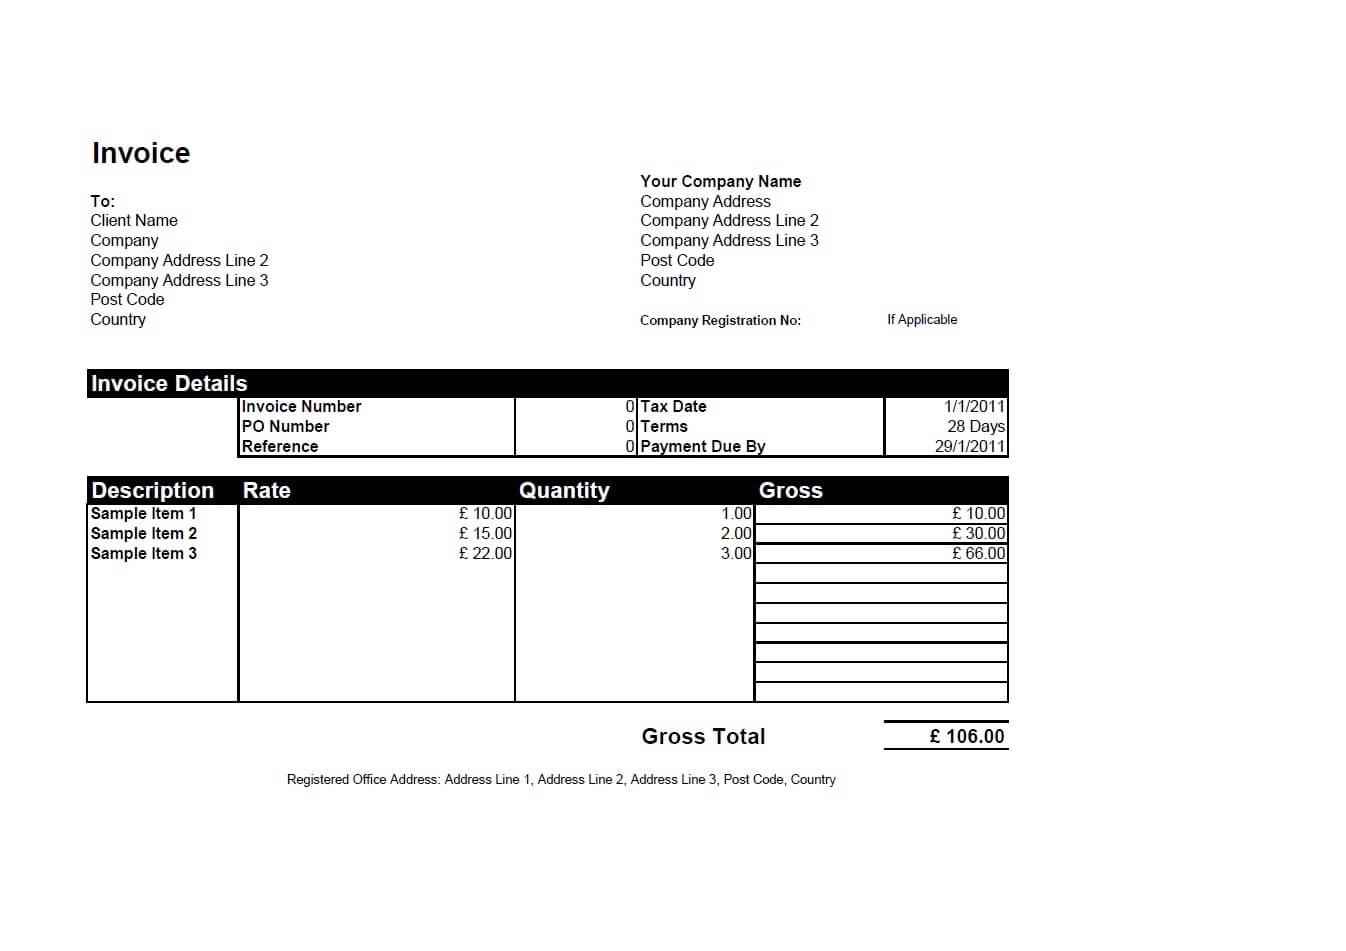 creating invoices in word